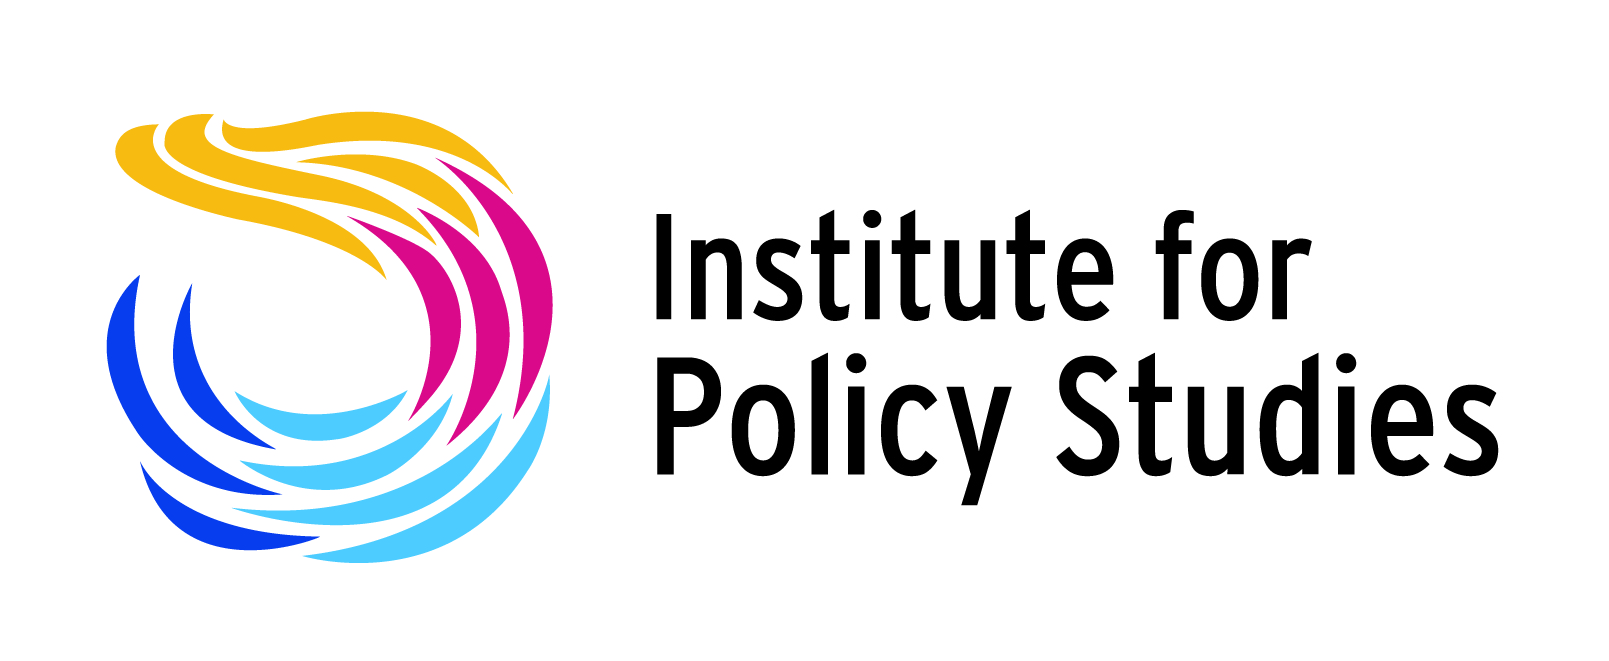 Institute for Policy Studies Logo. The words 